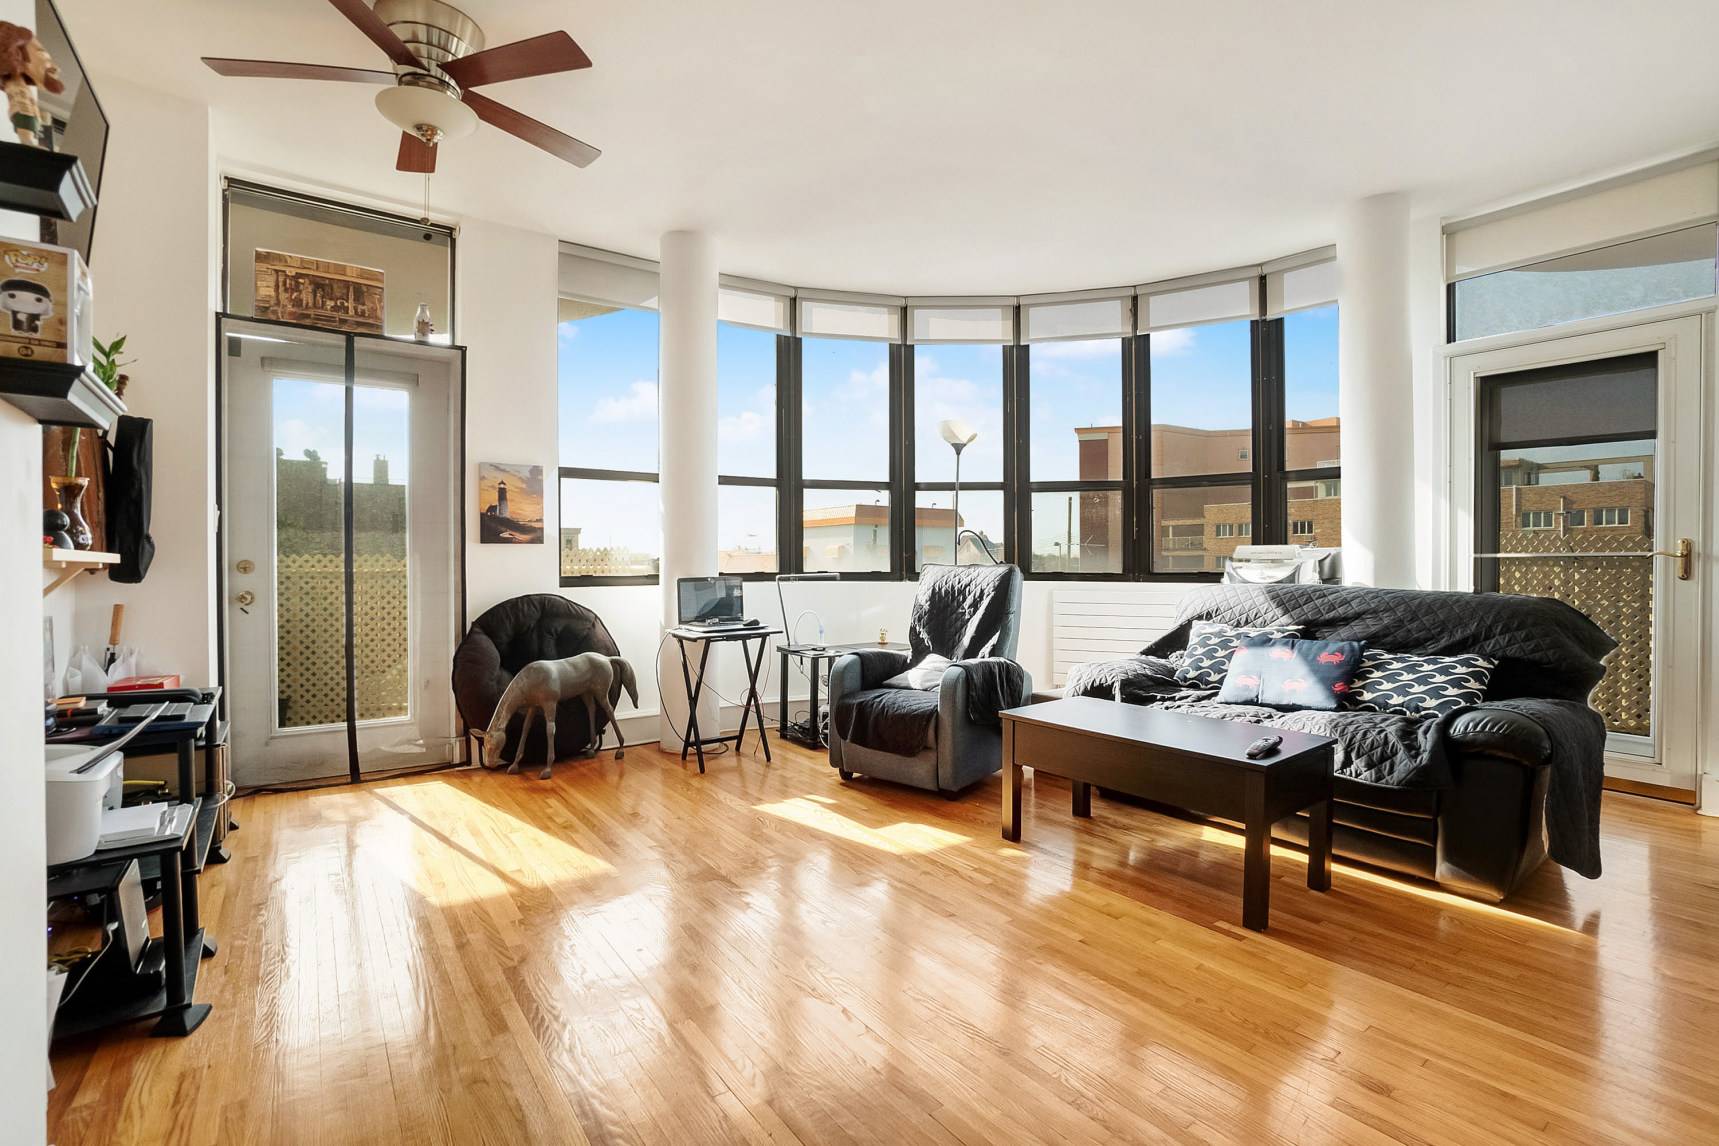 Welcome to 4050 Nostrand Avenue 2E This one bedroom condo is located in a boutique condo building located in prime Sheepshead Bay right off of Emmons Avenue.